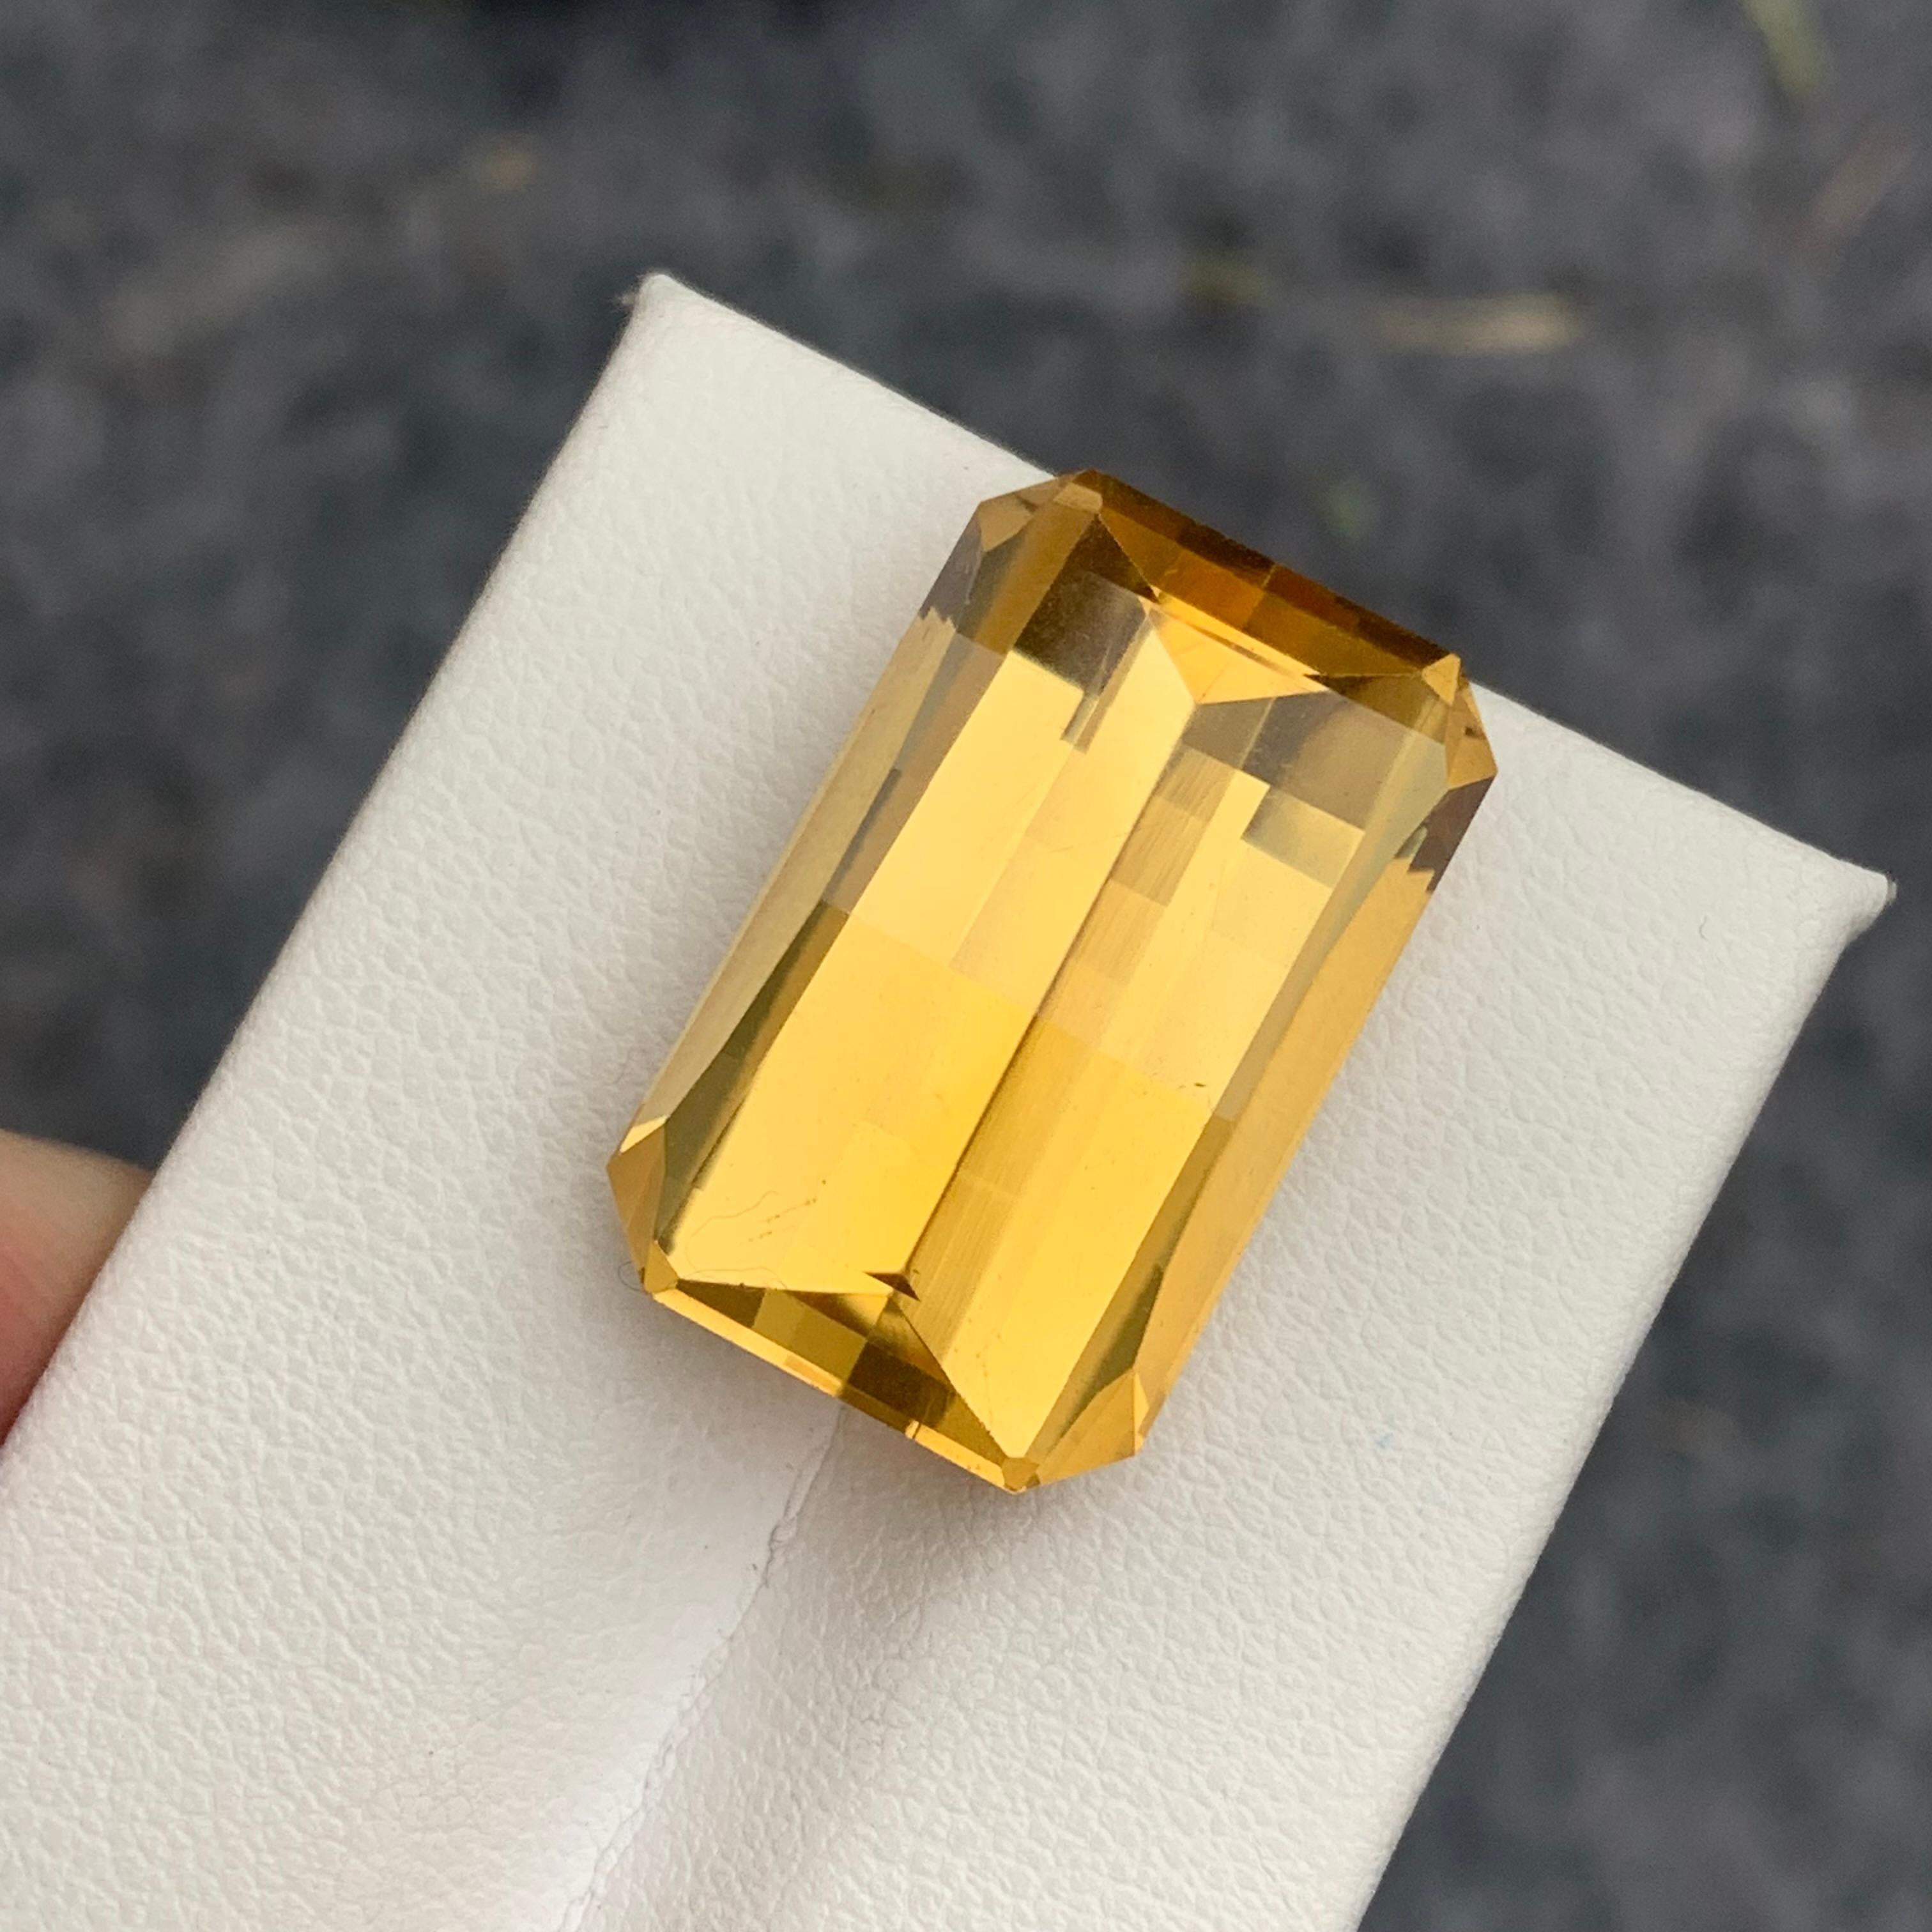 Gemstone Type : Citrine
Weight : 24.15 Carats
Dimensions : 20.2x13.8x11.1 mm
Clarity : Loupe Clean
Origin : Brazil
Color: Yellow
Shape: Emerald
Cut: Pixel Cut, Bar Cut
Certificate: On Demand
Month: November
.
The Many Healing Properties of